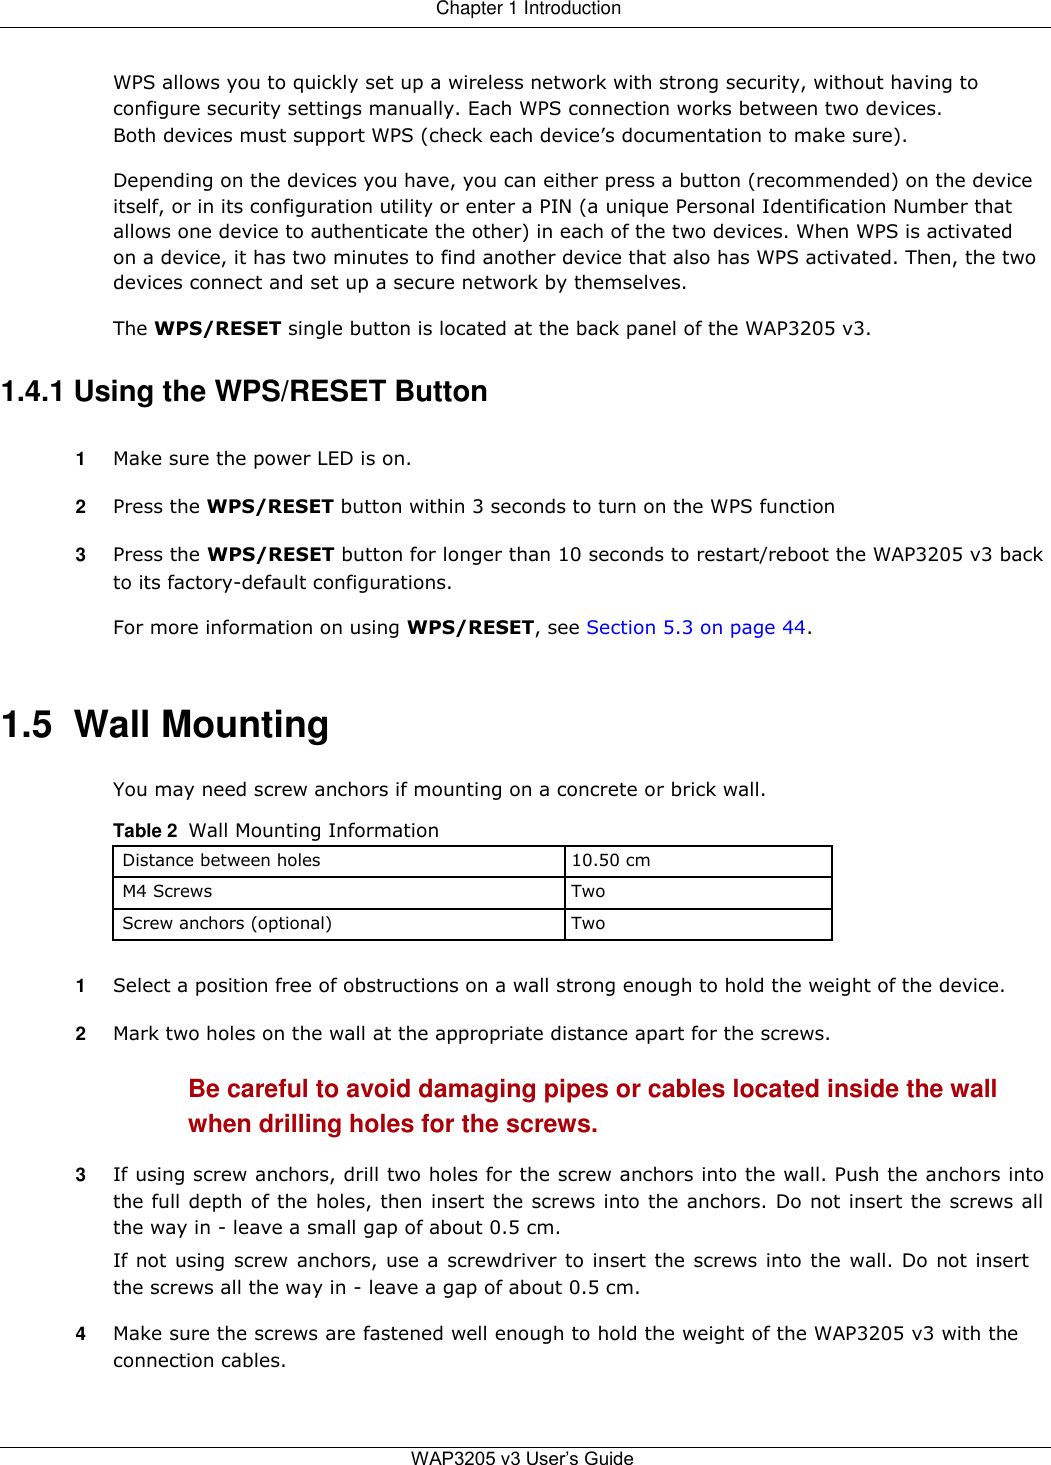 Chapter 1 Introduction   WPS allows you to quickly set up a wireless network with strong security, without having to configure security settings manually. Each WPS connection works between two devices. Both devices must support WPS (check each device’s documentation to make sure).  Depending on the devices you have, you can either press a button (recommended) on the device itself, or in its configuration utility or enter a PIN (a unique Personal Identification Number that allows one device to authenticate the other) in each of the two devices. When WPS is activated on a device, it has two minutes to find another device that also has WPS activated. Then, the two devices connect and set up a secure network by themselves.  The WPS/RESET single button is located at the back panel of the WAP3205 v3.  1.4.1 Using the WPS/RESET Button  1  Make sure the power LED is on.  2  Press the WPS/RESET button within 3 seconds to turn on the WPS function  3  Press the WPS/RESET button for longer than 10 seconds to restart/reboot the WAP3205 v3 back to its factory-default configurations.  For more information on using WPS/RESET, see Section 5.3 on page 44.    1.5  Wall Mounting  You may need screw anchors if mounting on a concrete or brick wall.  Table 2  Wall Mounting Information  Distance between holes 10.50 cm   M4 Screws Two   Screw anchors (optional) Two    1  Select a position free of obstructions on a wall strong enough to hold the weight of the device.  2  Mark two holes on the wall at the appropriate distance apart for the screws.  Be careful to avoid damaging pipes or cables located inside the wall when drilling holes for the screws.  3  If using screw anchors, drill two holes for the screw anchors into the wall. Push the anchors into the full depth of the holes, then insert the screws into the anchors. Do not insert the screws all the way in - leave a small gap of about 0.5 cm.  If not using screw anchors, use a screwdriver to insert the screws into the wall. Do not insert the screws all the way in - leave a gap of about 0.5 cm.  4  Make sure the screws are fastened well enough to hold the weight of the WAP3205 v3 with the connection cables.    WAP3205 v3 User’s Guide   